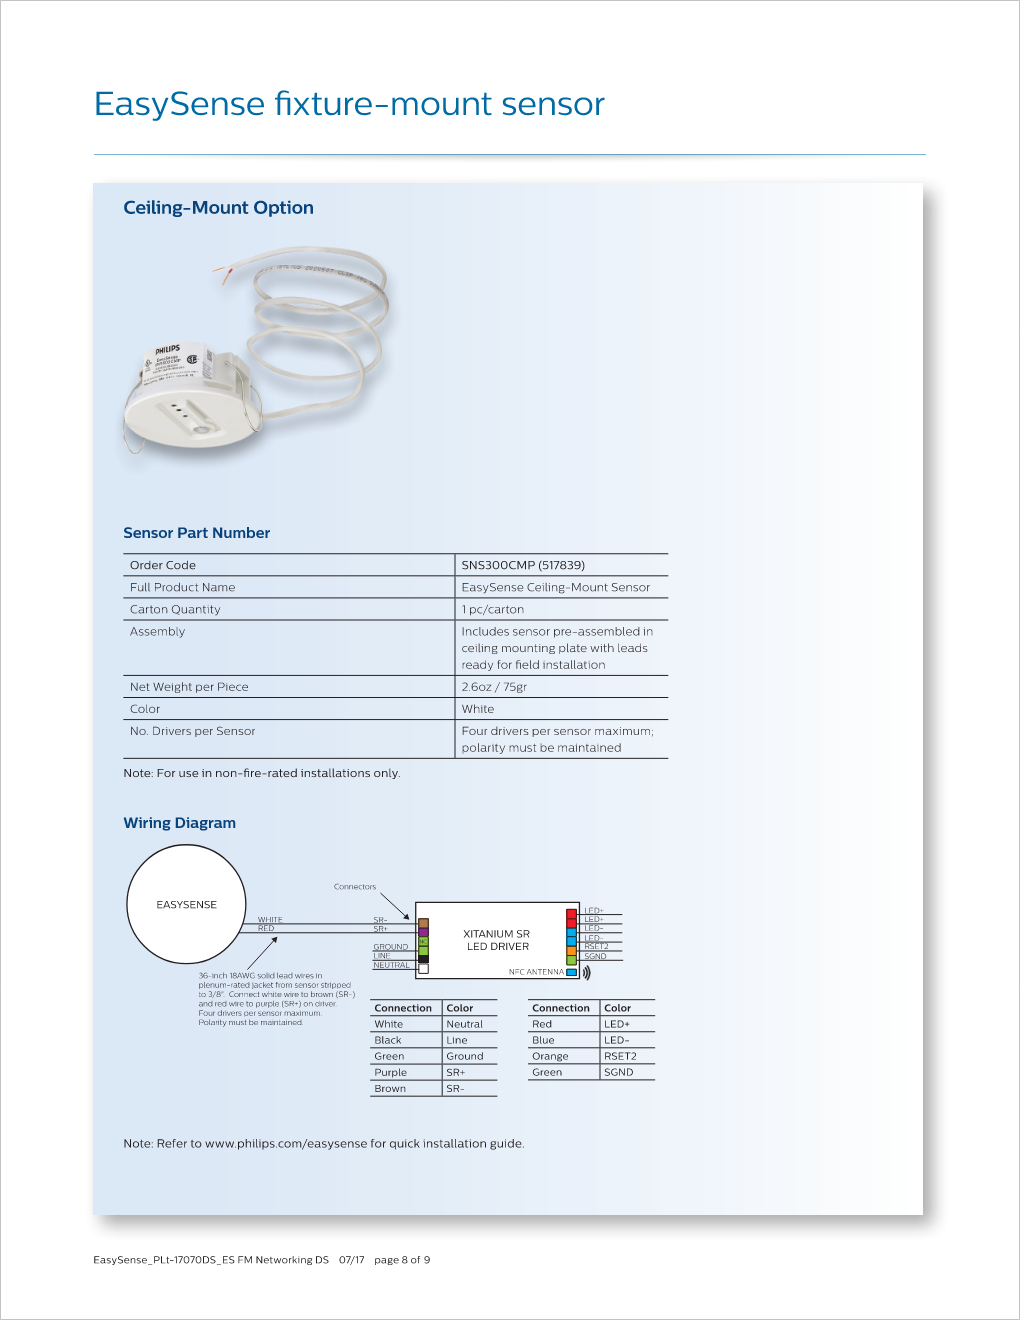 Philips_EasySense_SNS300_Fixture-Mount_for_Networking_Datasheet__PLt-17070DS__Page_008.png